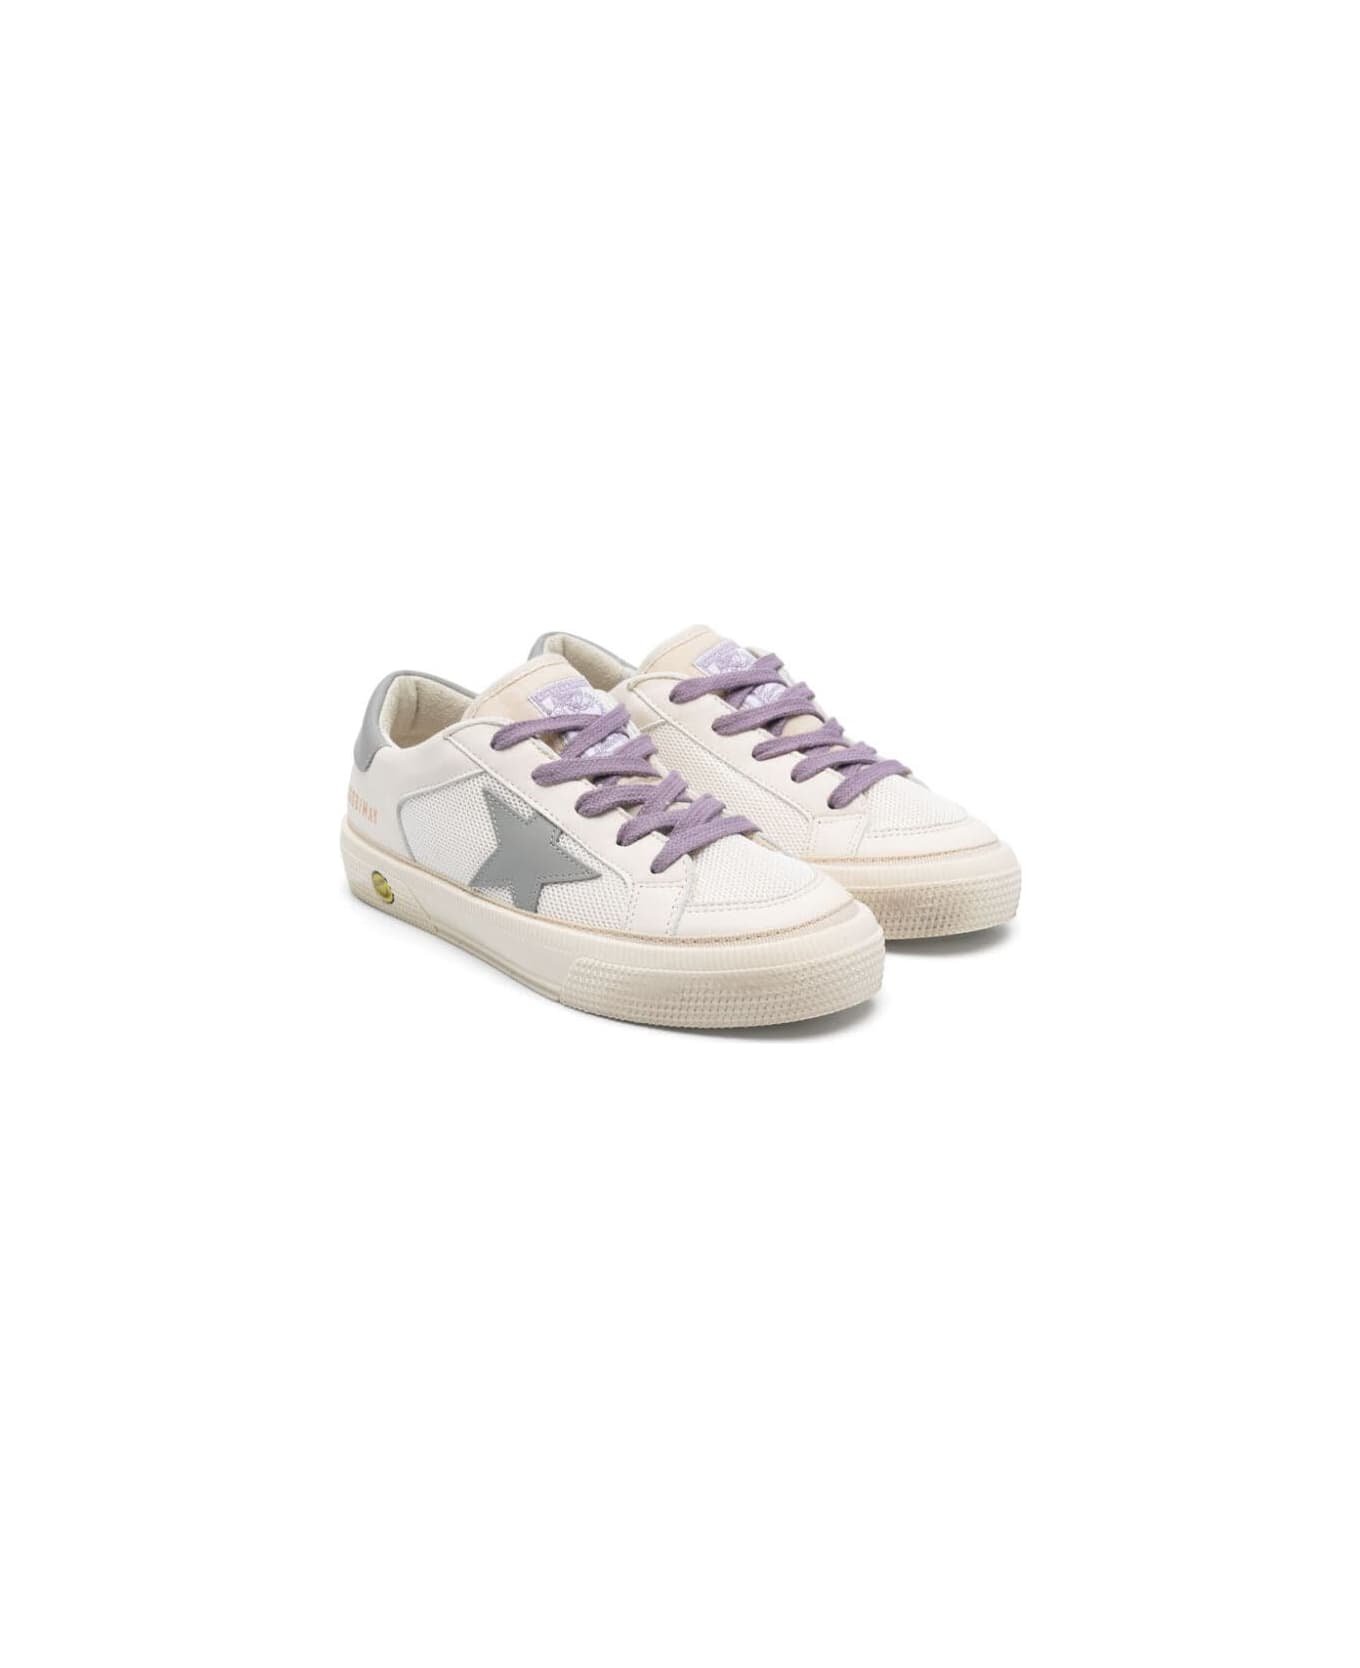 Golden Goose May Nappa And Net Upper Leather Star And Heel Nylo Tongue - White Grey